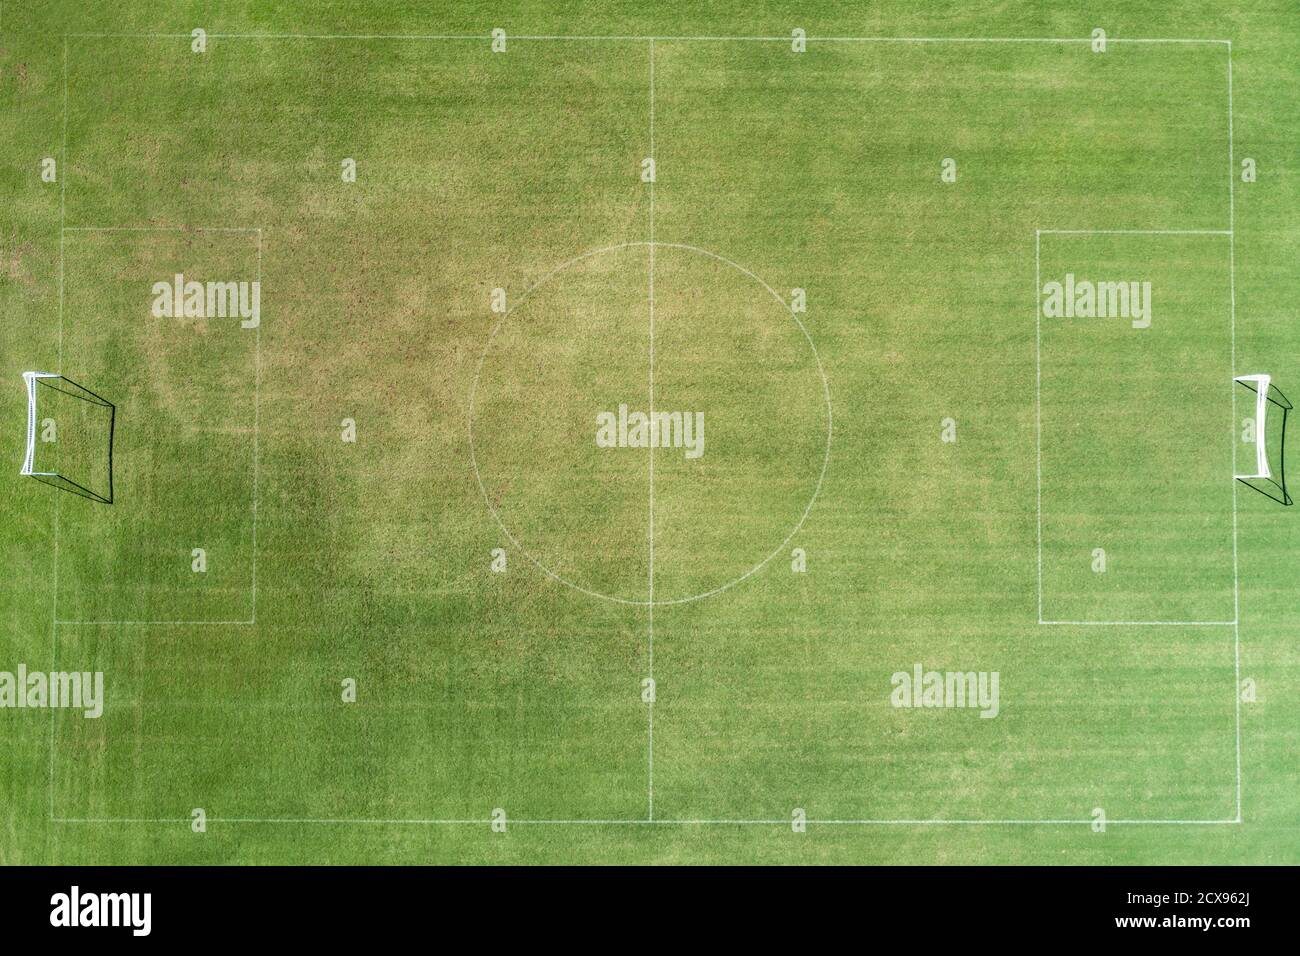 Looking down on football field. Stock Photo